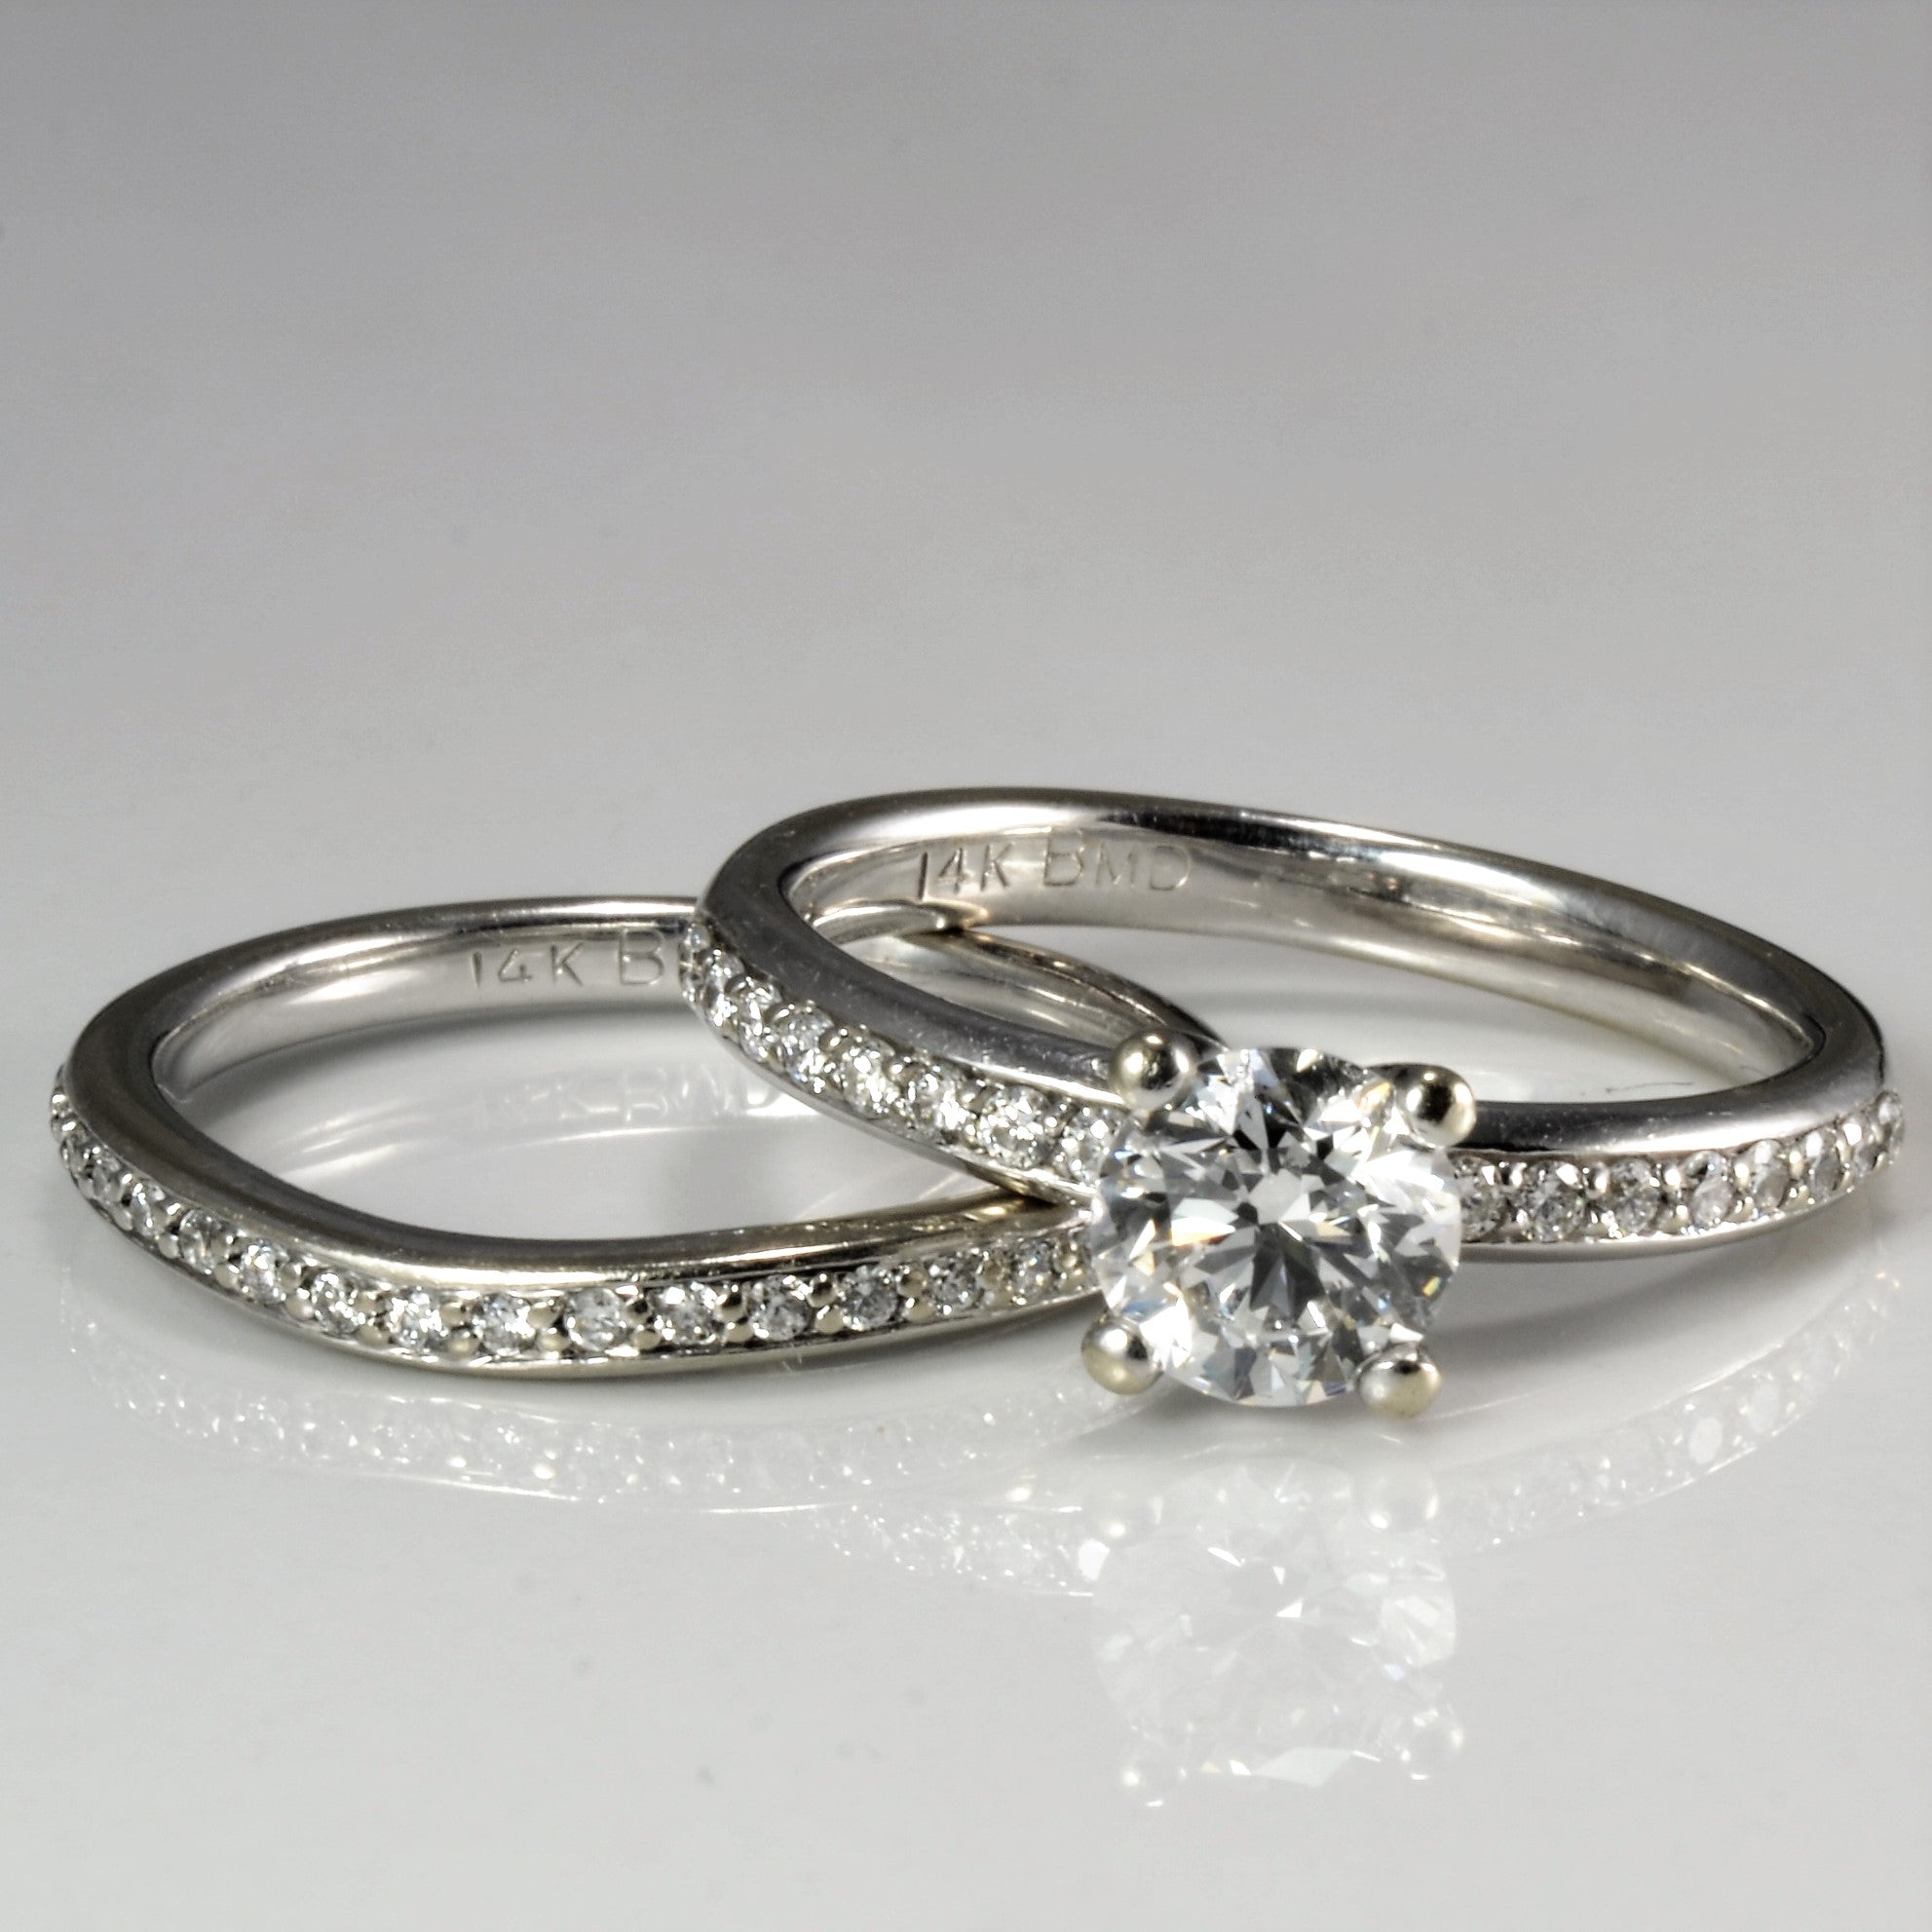 Solitaire with Accents Diamond Engagement Ring Set | 1.05 ctw, SZ 5.75 |